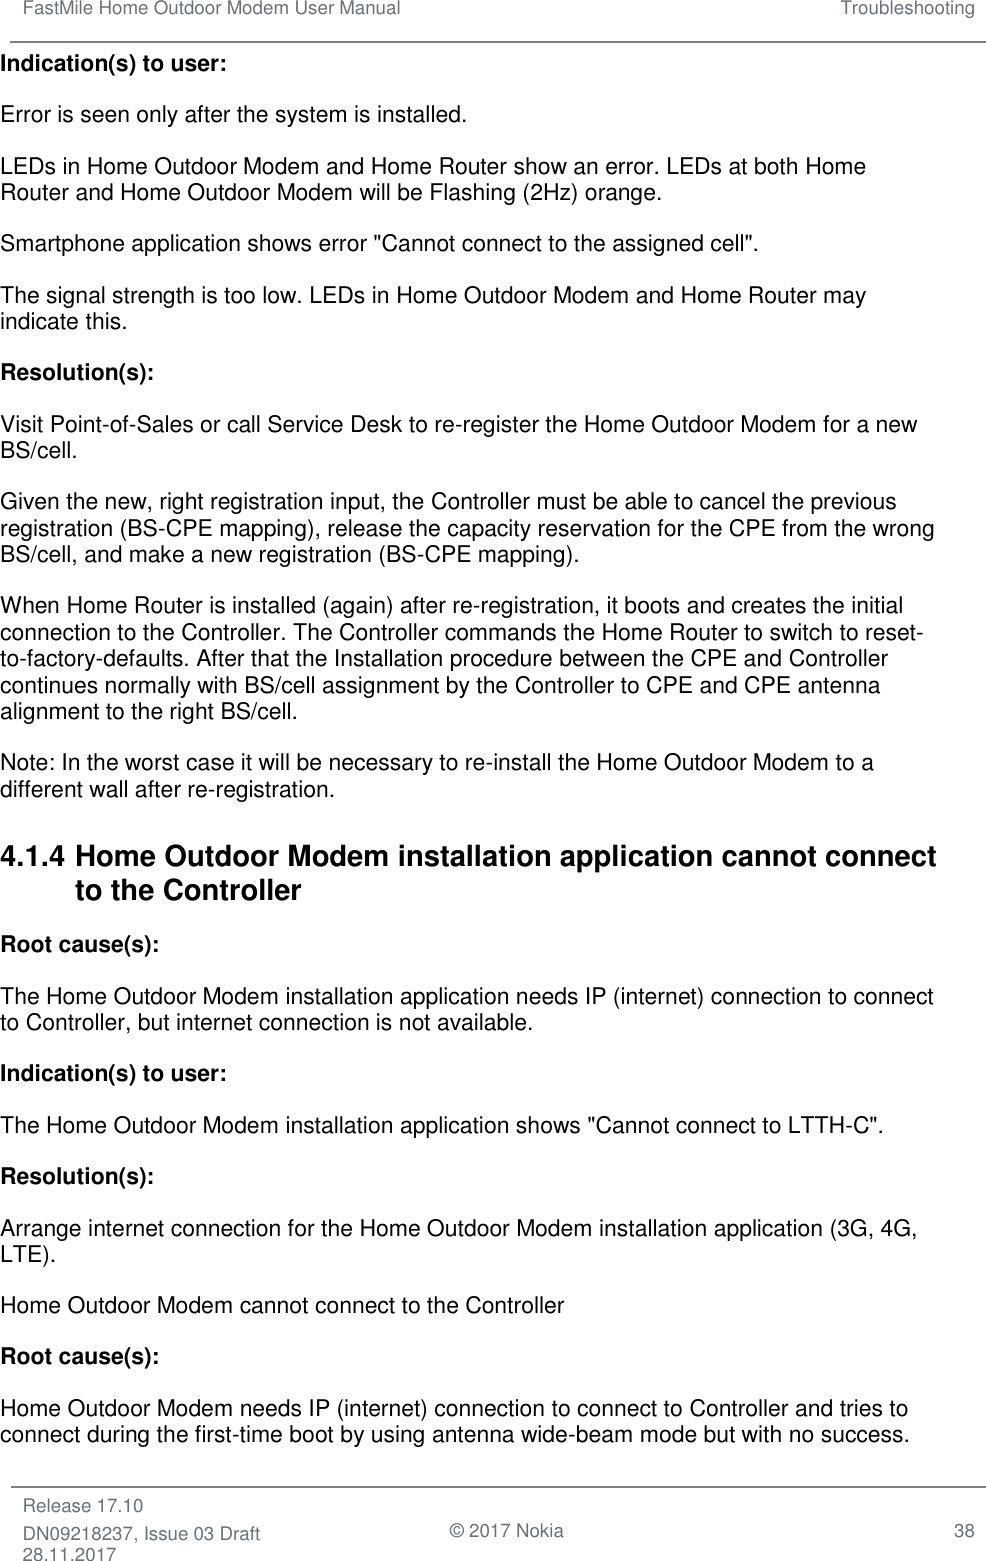 FastMile Home Outdoor Modem User Manual Troubleshooting  Release 17.10 DN09218237, Issue 03 Draft 28.11.2017                                © 2017 Nokia 38  Indication(s) to user:  Error is seen only after the system is installed. LEDs in Home Outdoor Modem and Home Router show an error. LEDs at both Home Router and Home Outdoor Modem will be Flashing (2Hz) orange. Smartphone application shows error &quot;Cannot connect to the assigned cell&quot;. The signal strength is too low. LEDs in Home Outdoor Modem and Home Router may indicate this. Resolution(s):  Visit Point-of-Sales or call Service Desk to re-register the Home Outdoor Modem for a new BS/cell.  Given the new, right registration input, the Controller must be able to cancel the previous registration (BS-CPE mapping), release the capacity reservation for the CPE from the wrong BS/cell, and make a new registration (BS-CPE mapping).   When Home Router is installed (again) after re-registration, it boots and creates the initial connection to the Controller. The Controller commands the Home Router to switch to reset-to-factory-defaults. After that the Installation procedure between the CPE and Controller continues normally with BS/cell assignment by the Controller to CPE and CPE antenna alignment to the right BS/cell.         Note: In the worst case it will be necessary to re-install the Home Outdoor Modem to a different wall after re-registration.  4.1.4 Home Outdoor Modem installation application cannot connect to the Controller Root cause(s):  The Home Outdoor Modem installation application needs IP (internet) connection to connect to Controller, but internet connection is not available.   Indication(s) to user:  The Home Outdoor Modem installation application shows &quot;Cannot connect to LTTH-C&quot;. Resolution(s): Arrange internet connection for the Home Outdoor Modem installation application (3G, 4G, LTE). Home Outdoor Modem cannot connect to the Controller Root cause(s):  Home Outdoor Modem needs IP (internet) connection to connect to Controller and tries to connect during the first-time boot by using antenna wide-beam mode but with no success.   